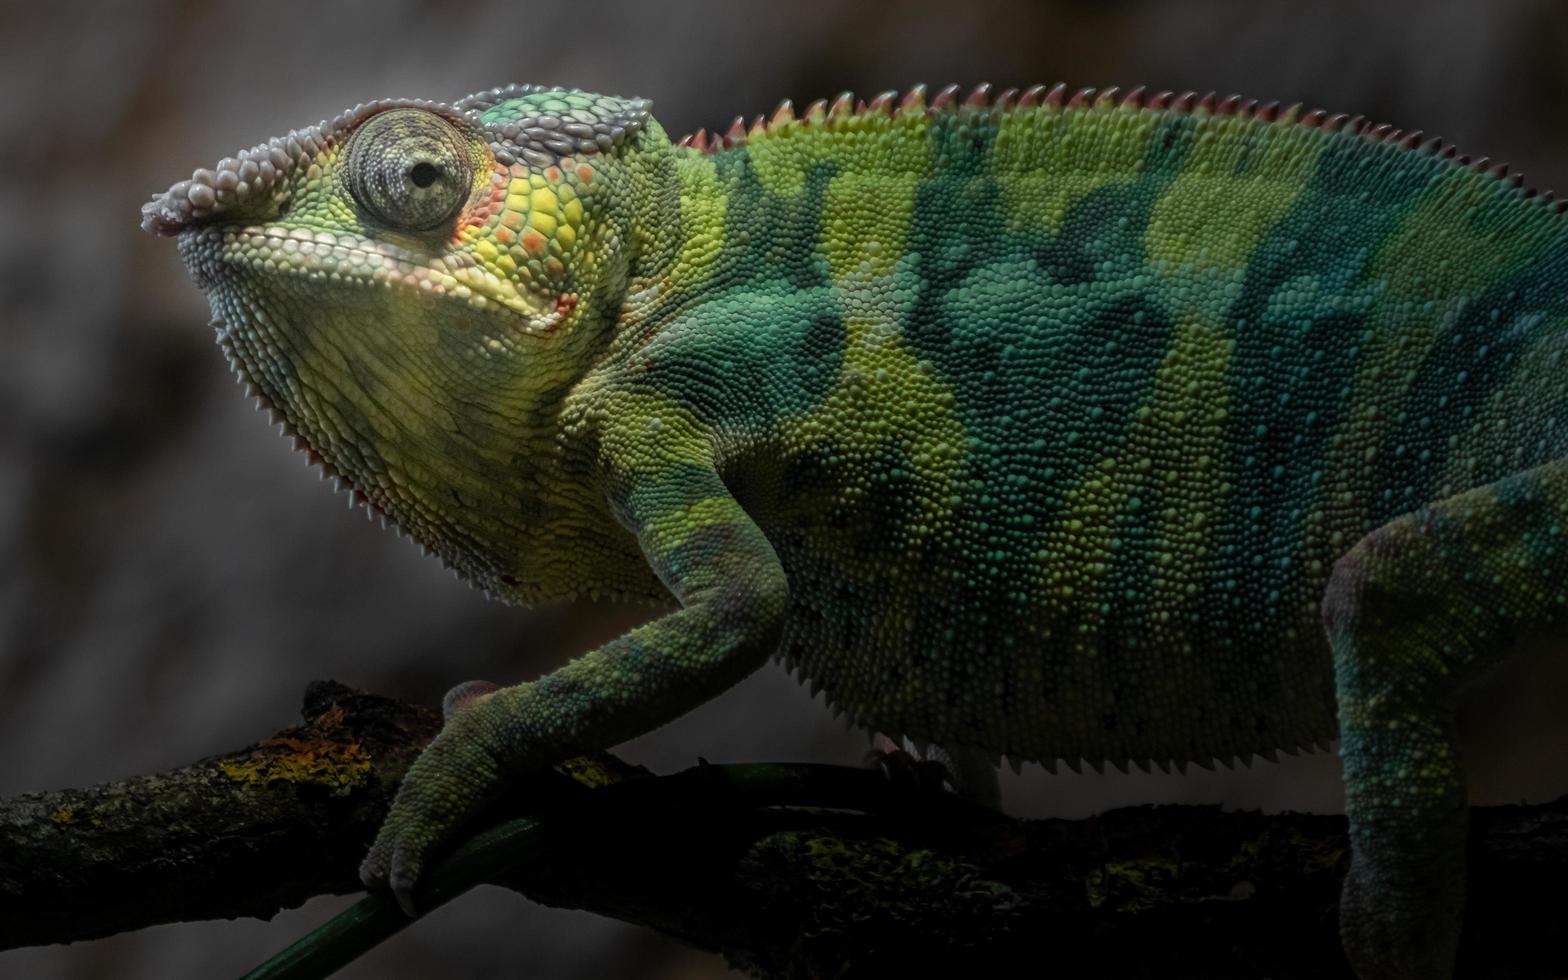 Portrait of Panther chameleon photo